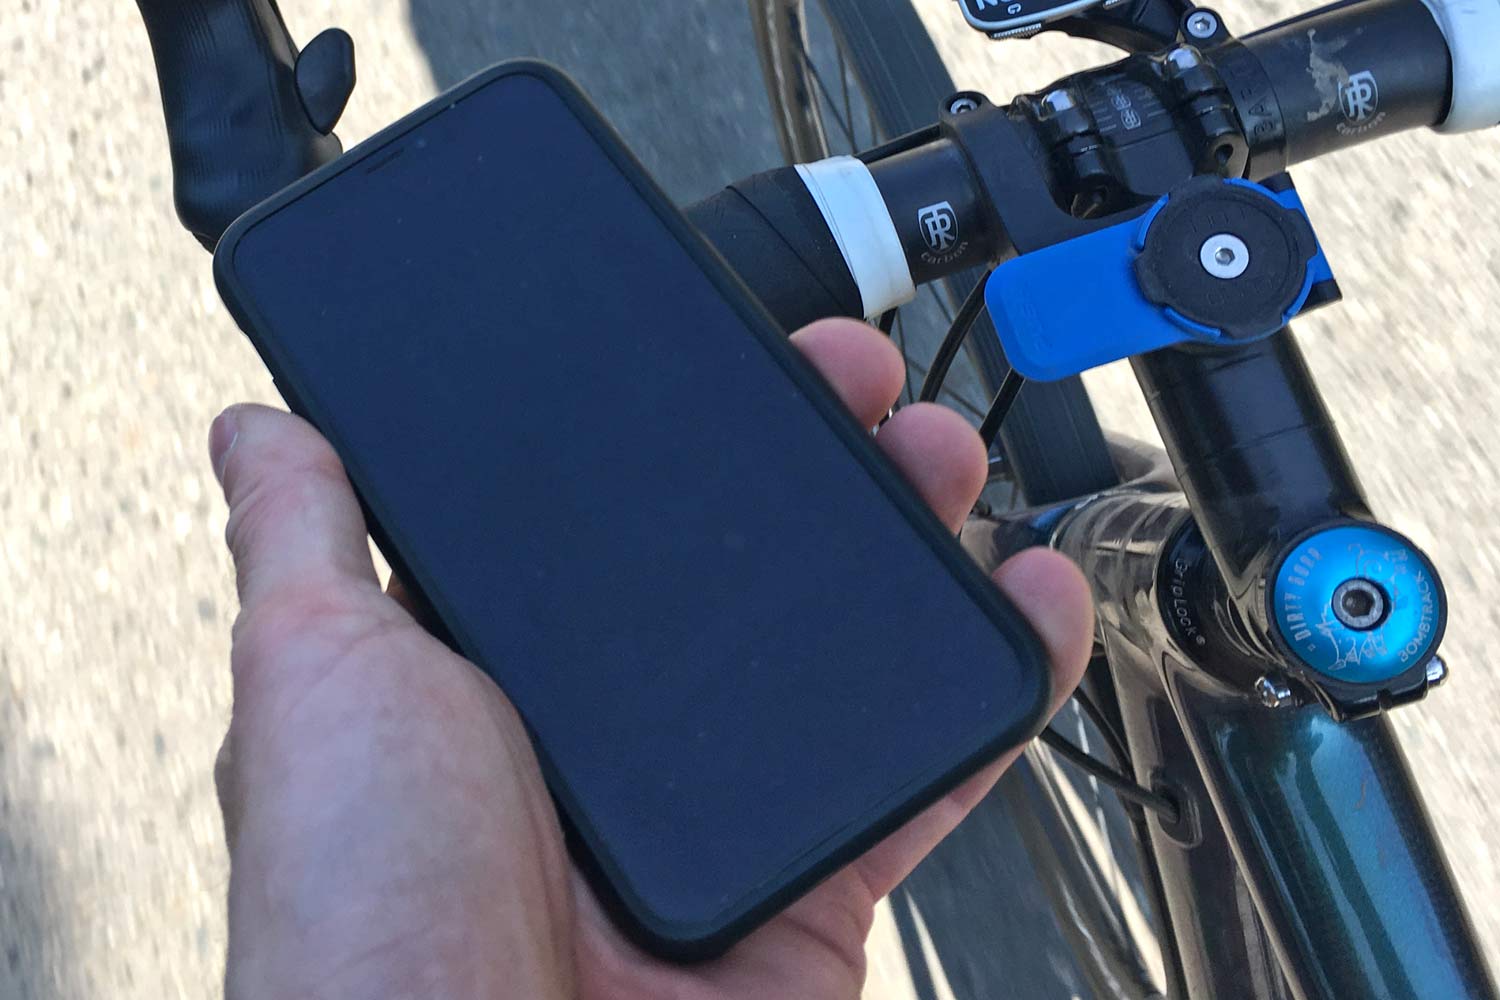 Review: Quad Lock iPhone X case & out-front Bike Mount keeps